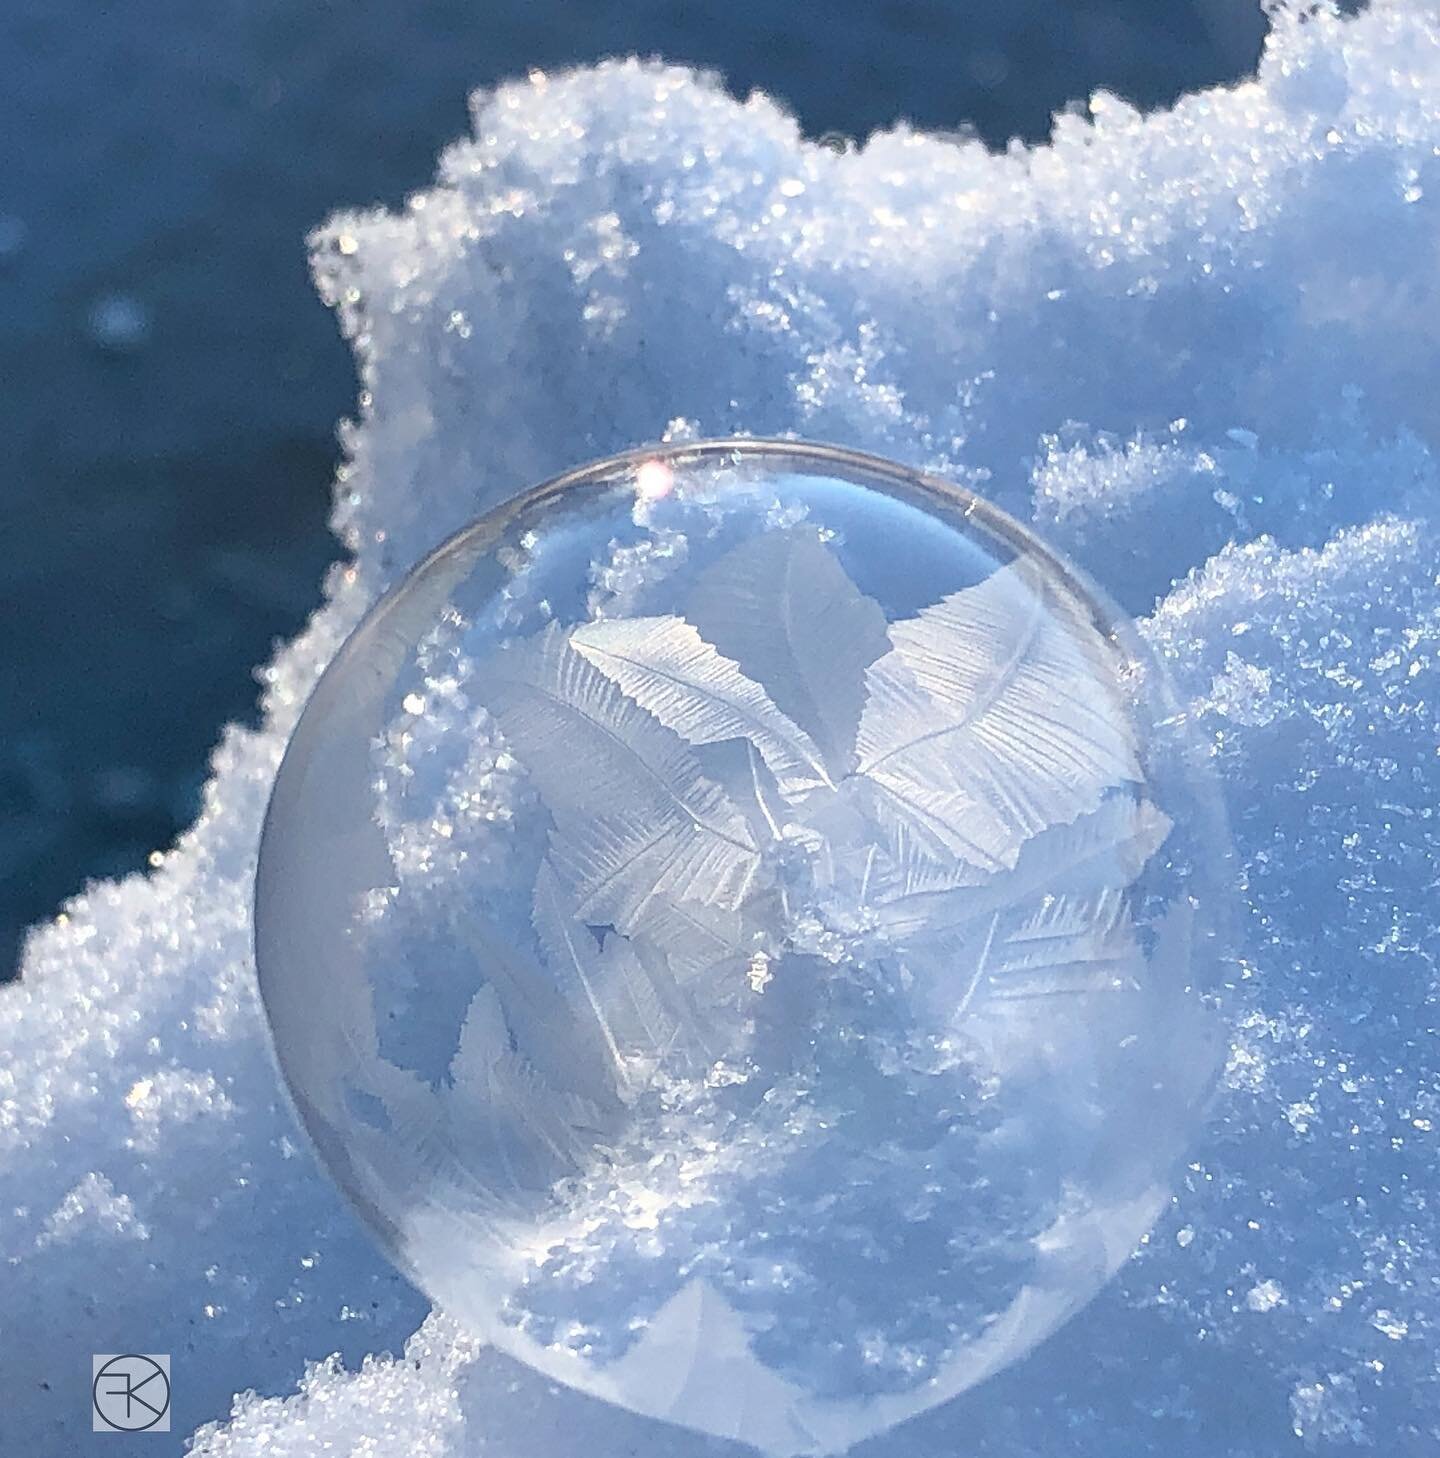 A frozen soap bubble photographed at 11 degrees F. #frozenbubbles #frozenbubblesphotography